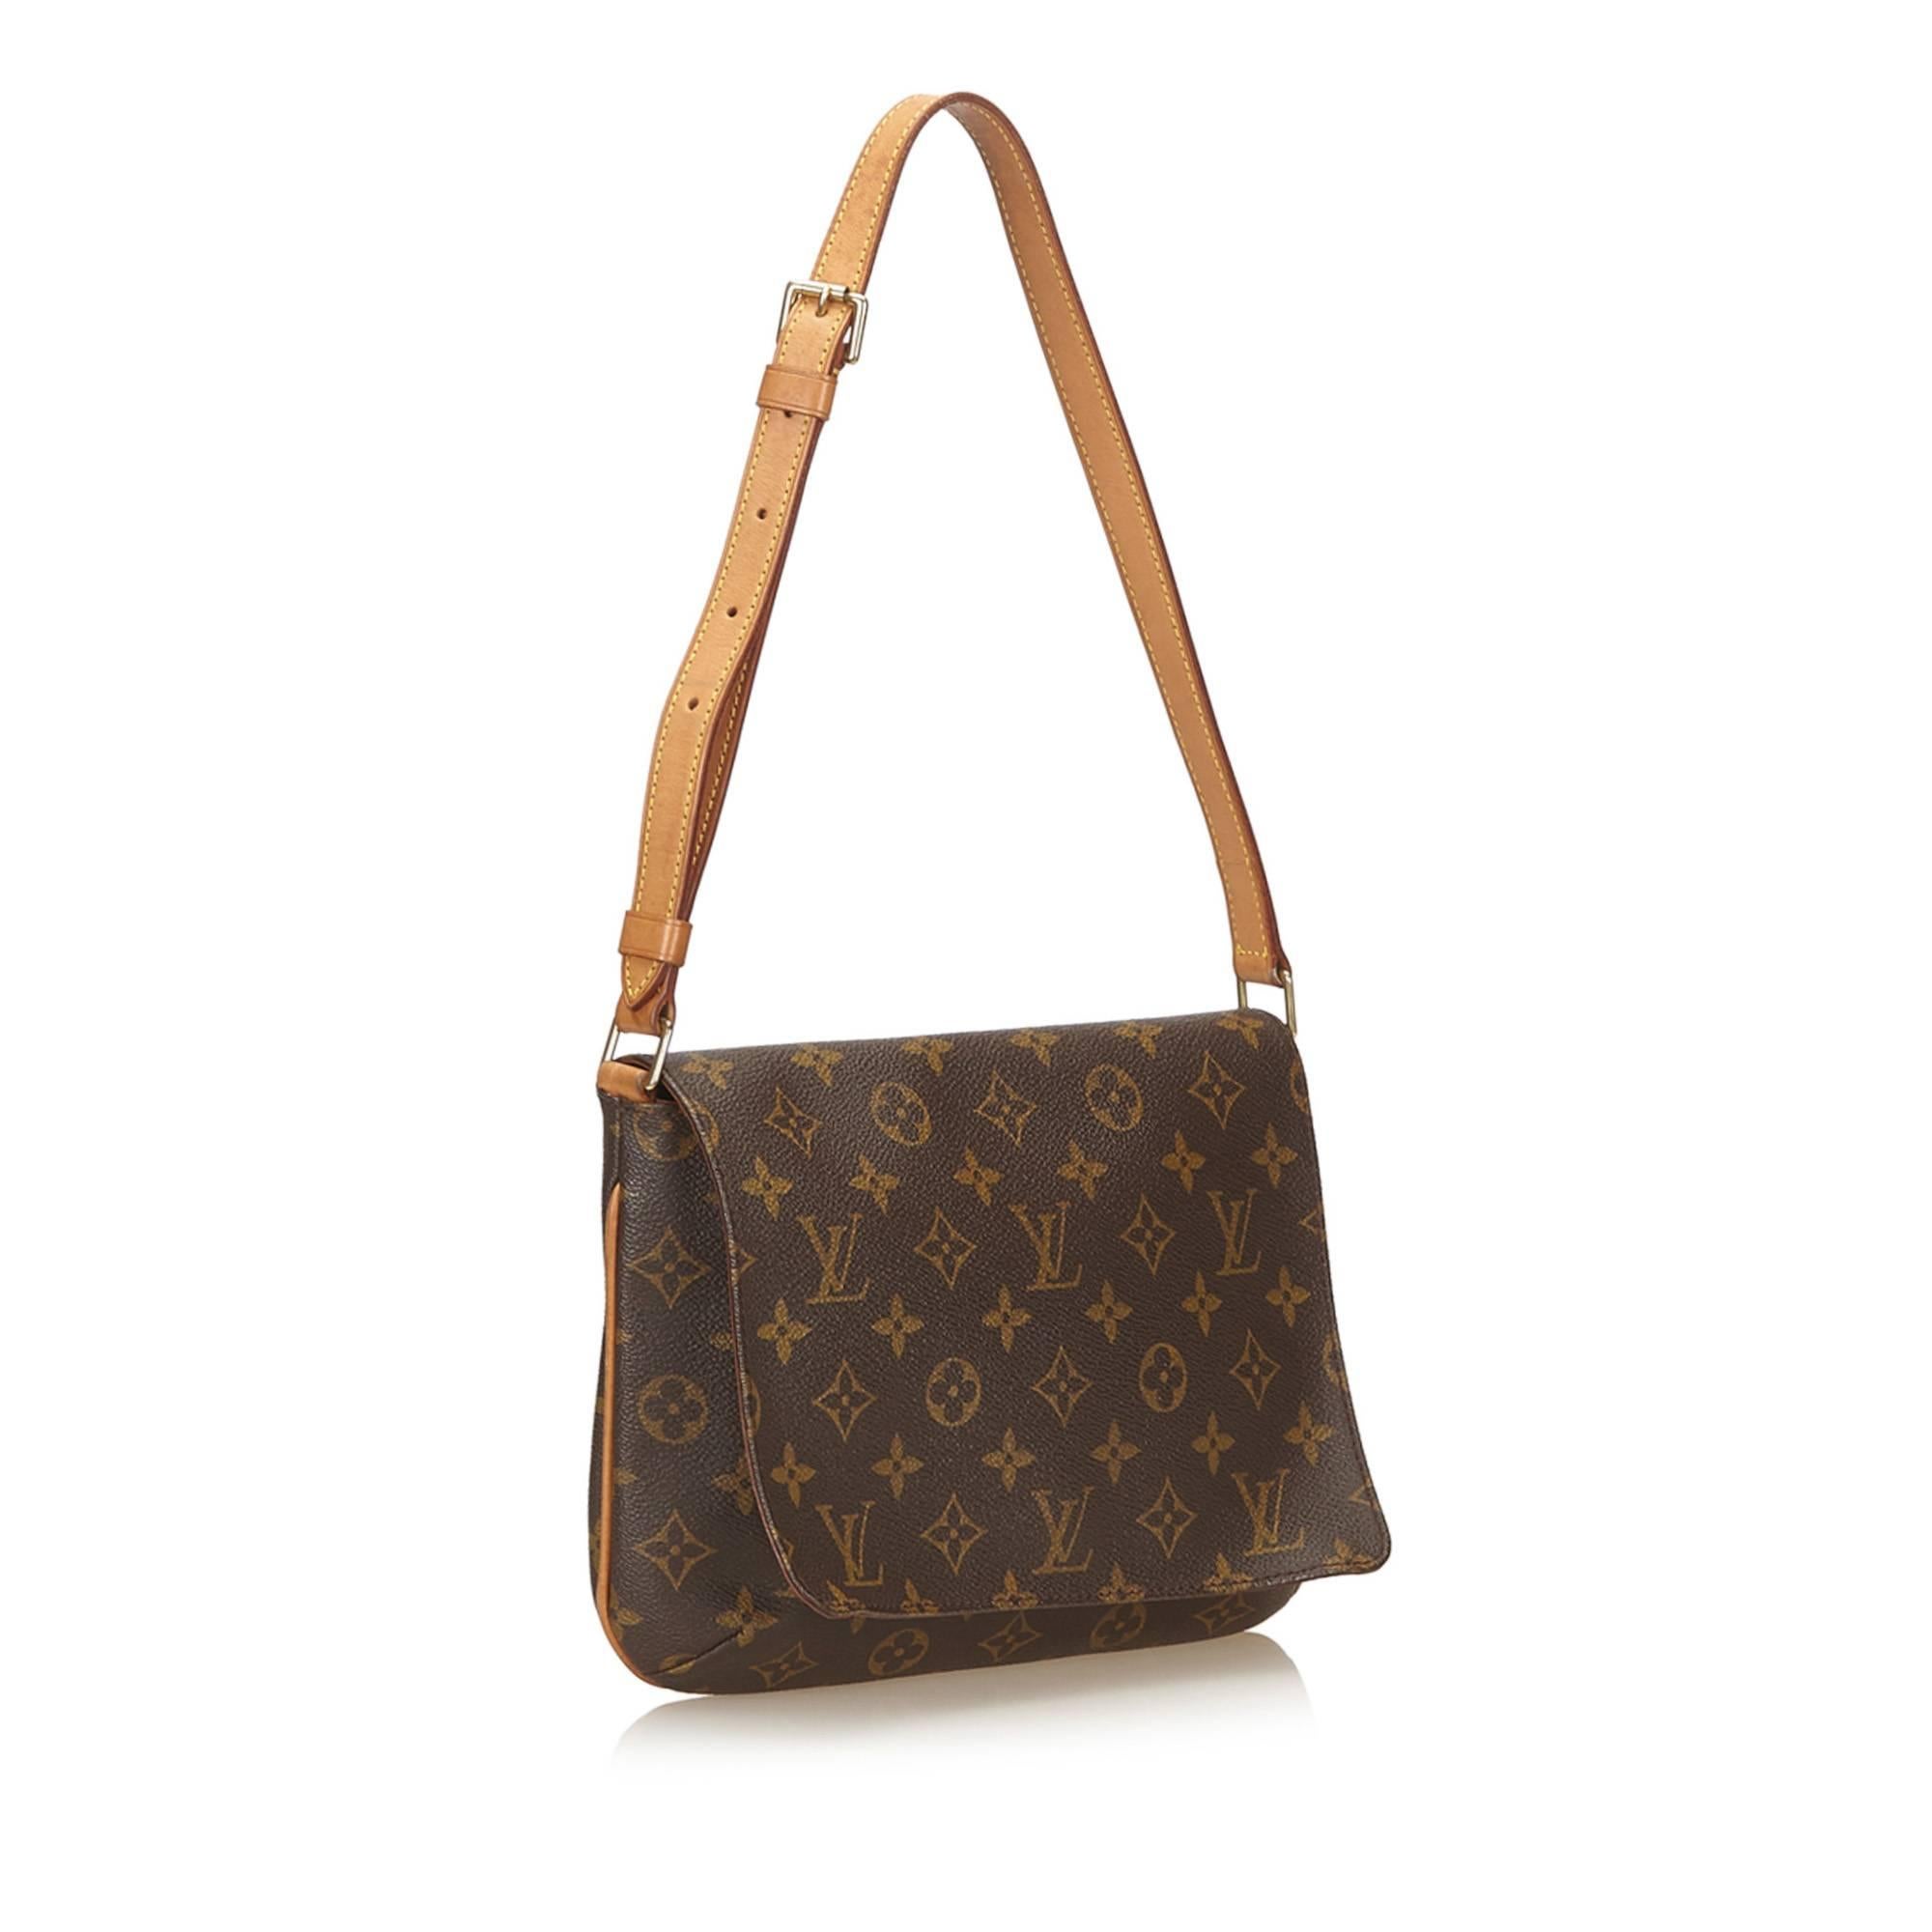 The Musette Tango features a monogram canvas body, a leather shoulder strap, a front flap with a magnetic closure, and an interior slip pocket. 

It carries a B condition rating.

Dimensions: 
Length 26 cm
Width 19 cm
Depth 7 cm
Shoulder Drop 20